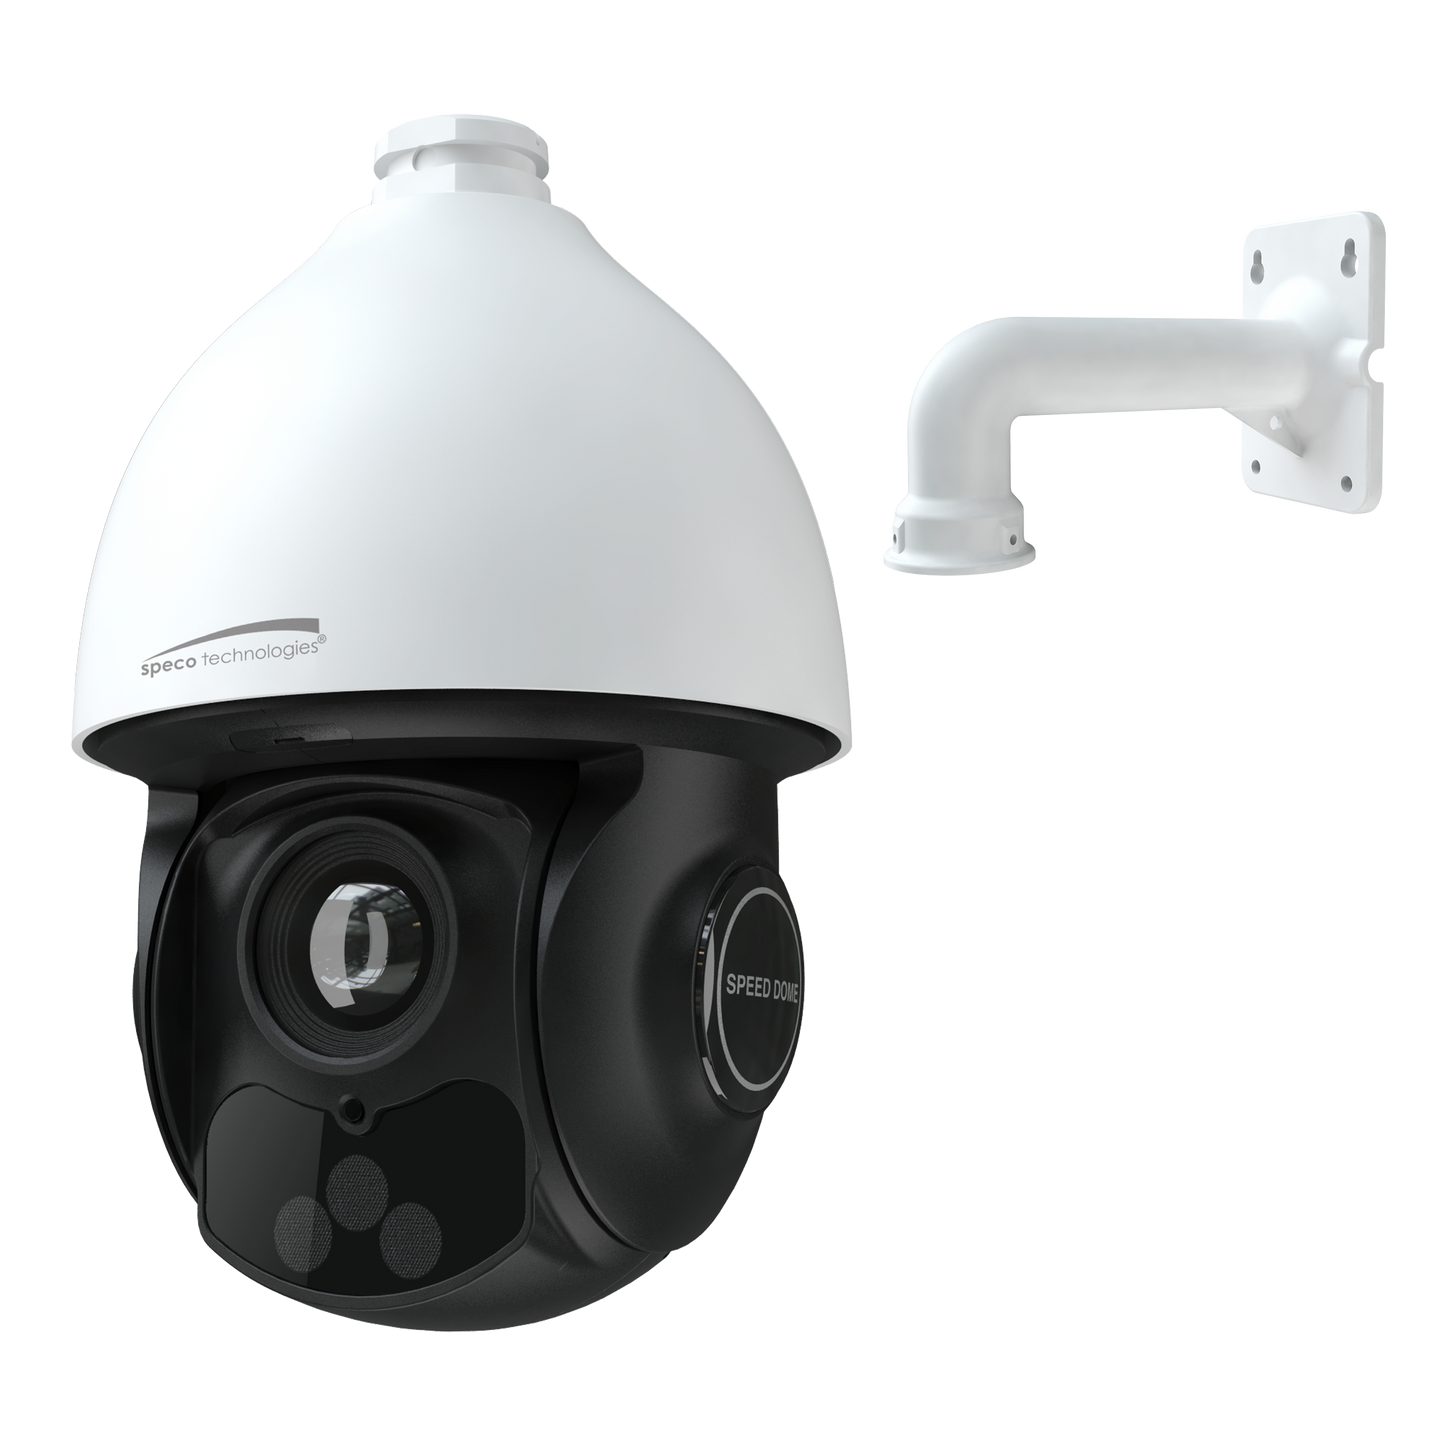 4MP 25X PTZ Advanced Analytic IP Camera with Smart Tracking 4.8-120mm 25x optical zoom lens